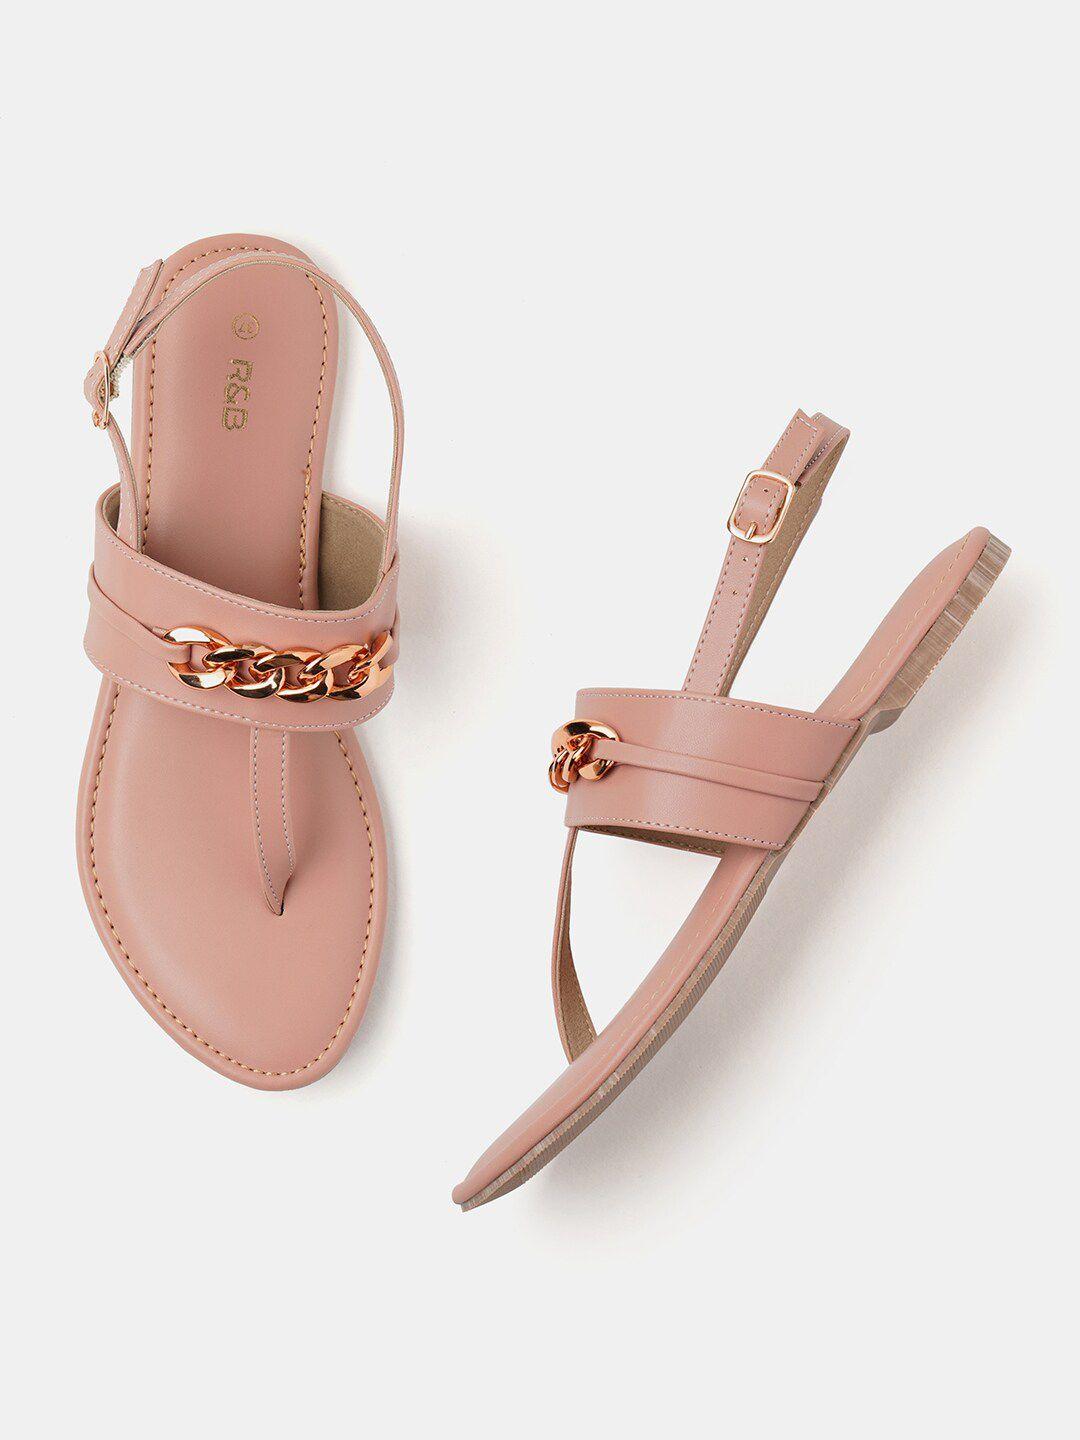 r&b embellished t-strap flats with buckle closure